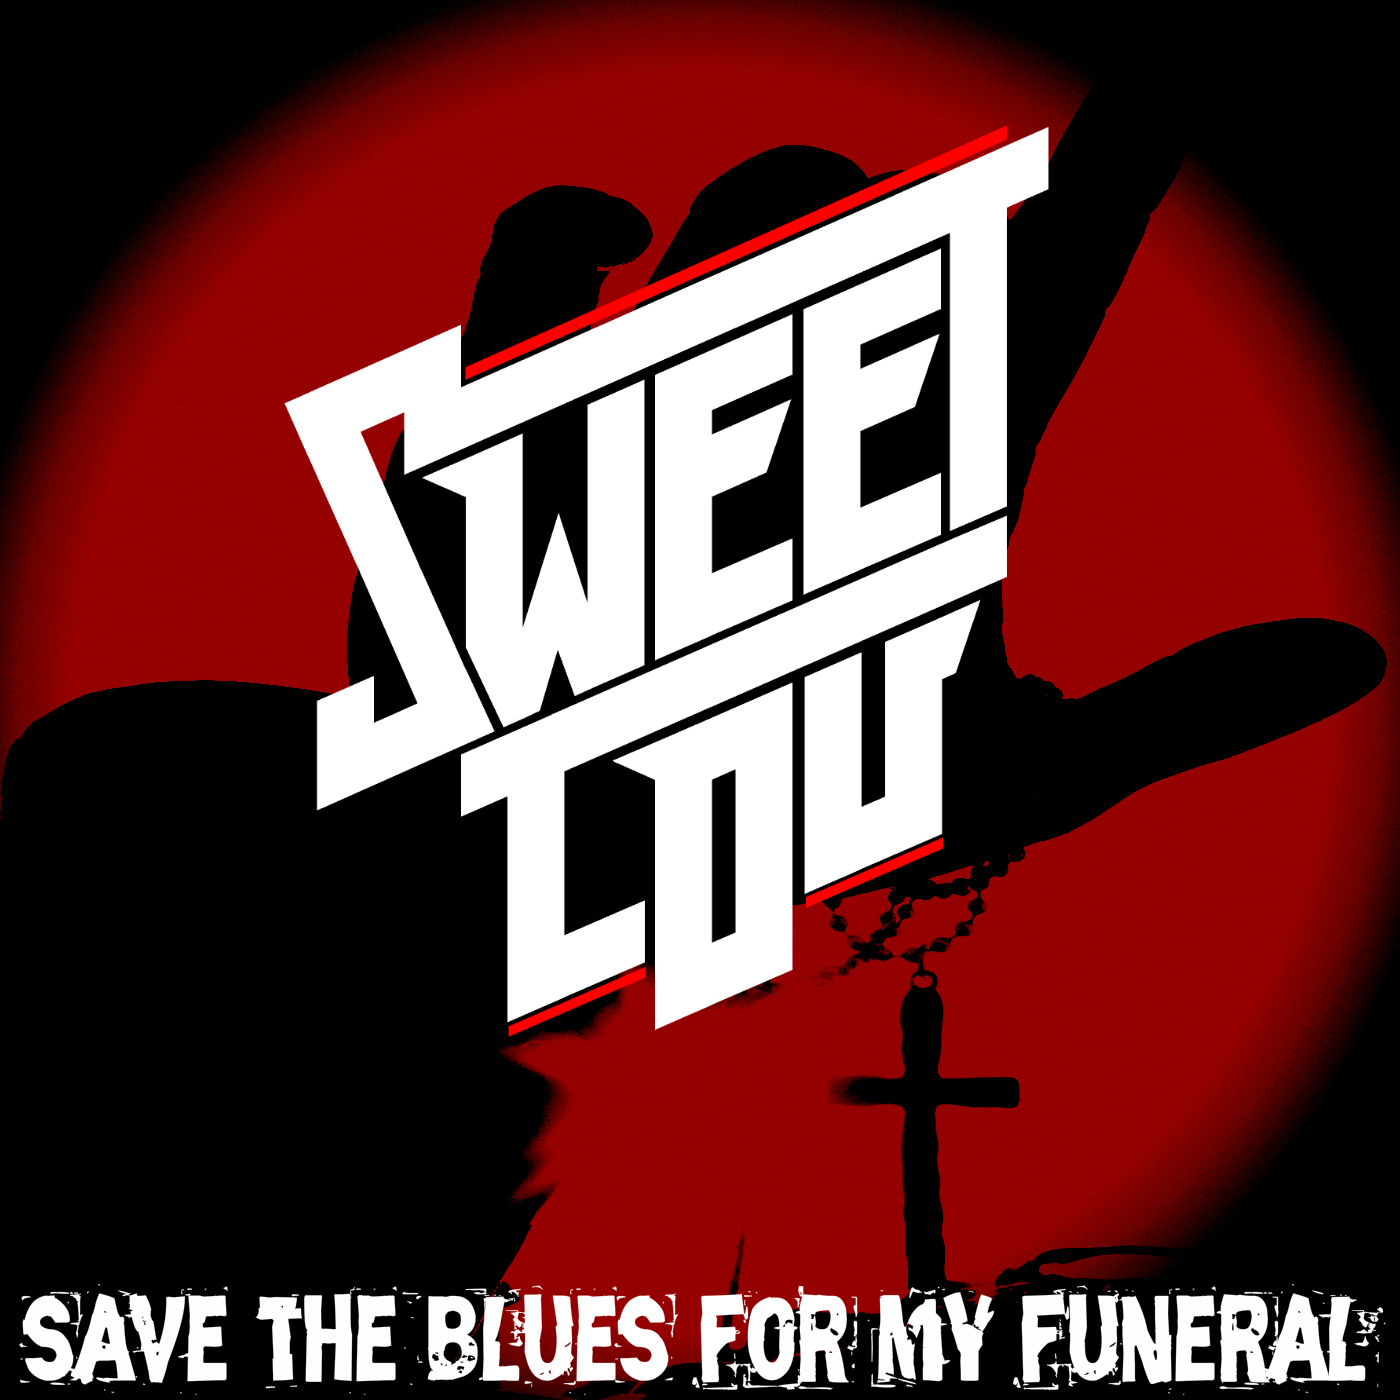 Save the blues for my funeral